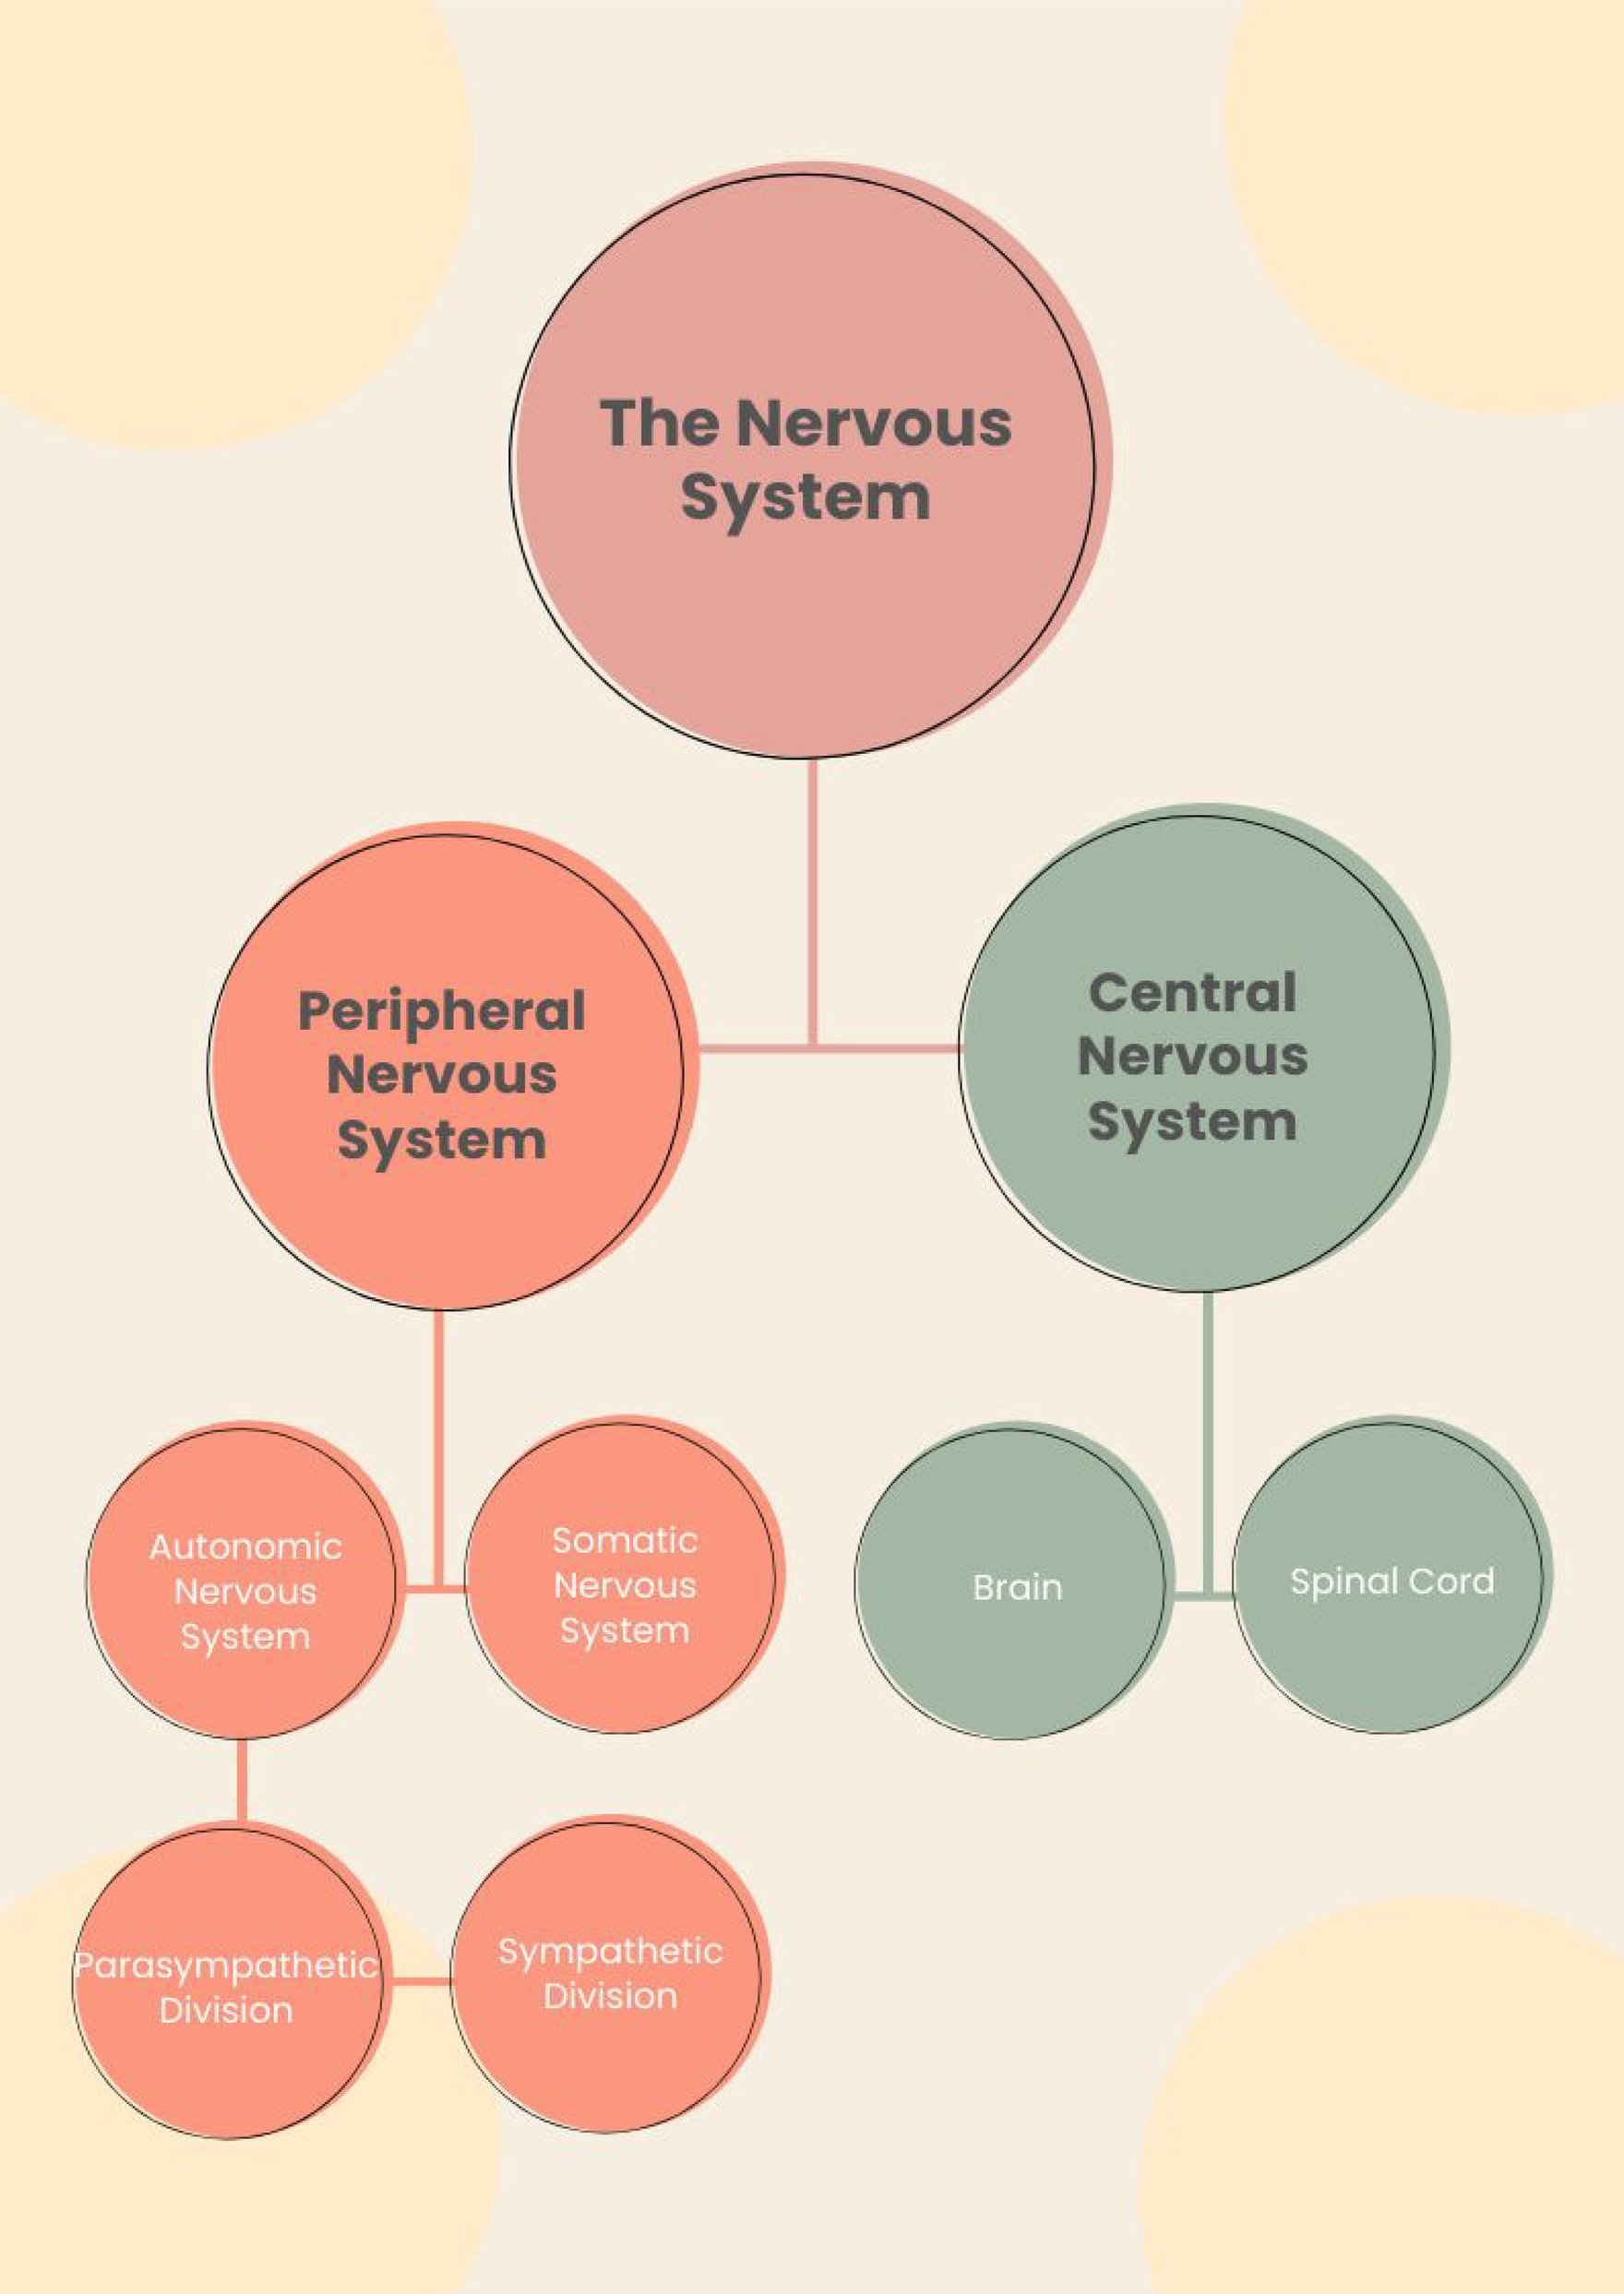 central nervous system and peripheral nervous system chart